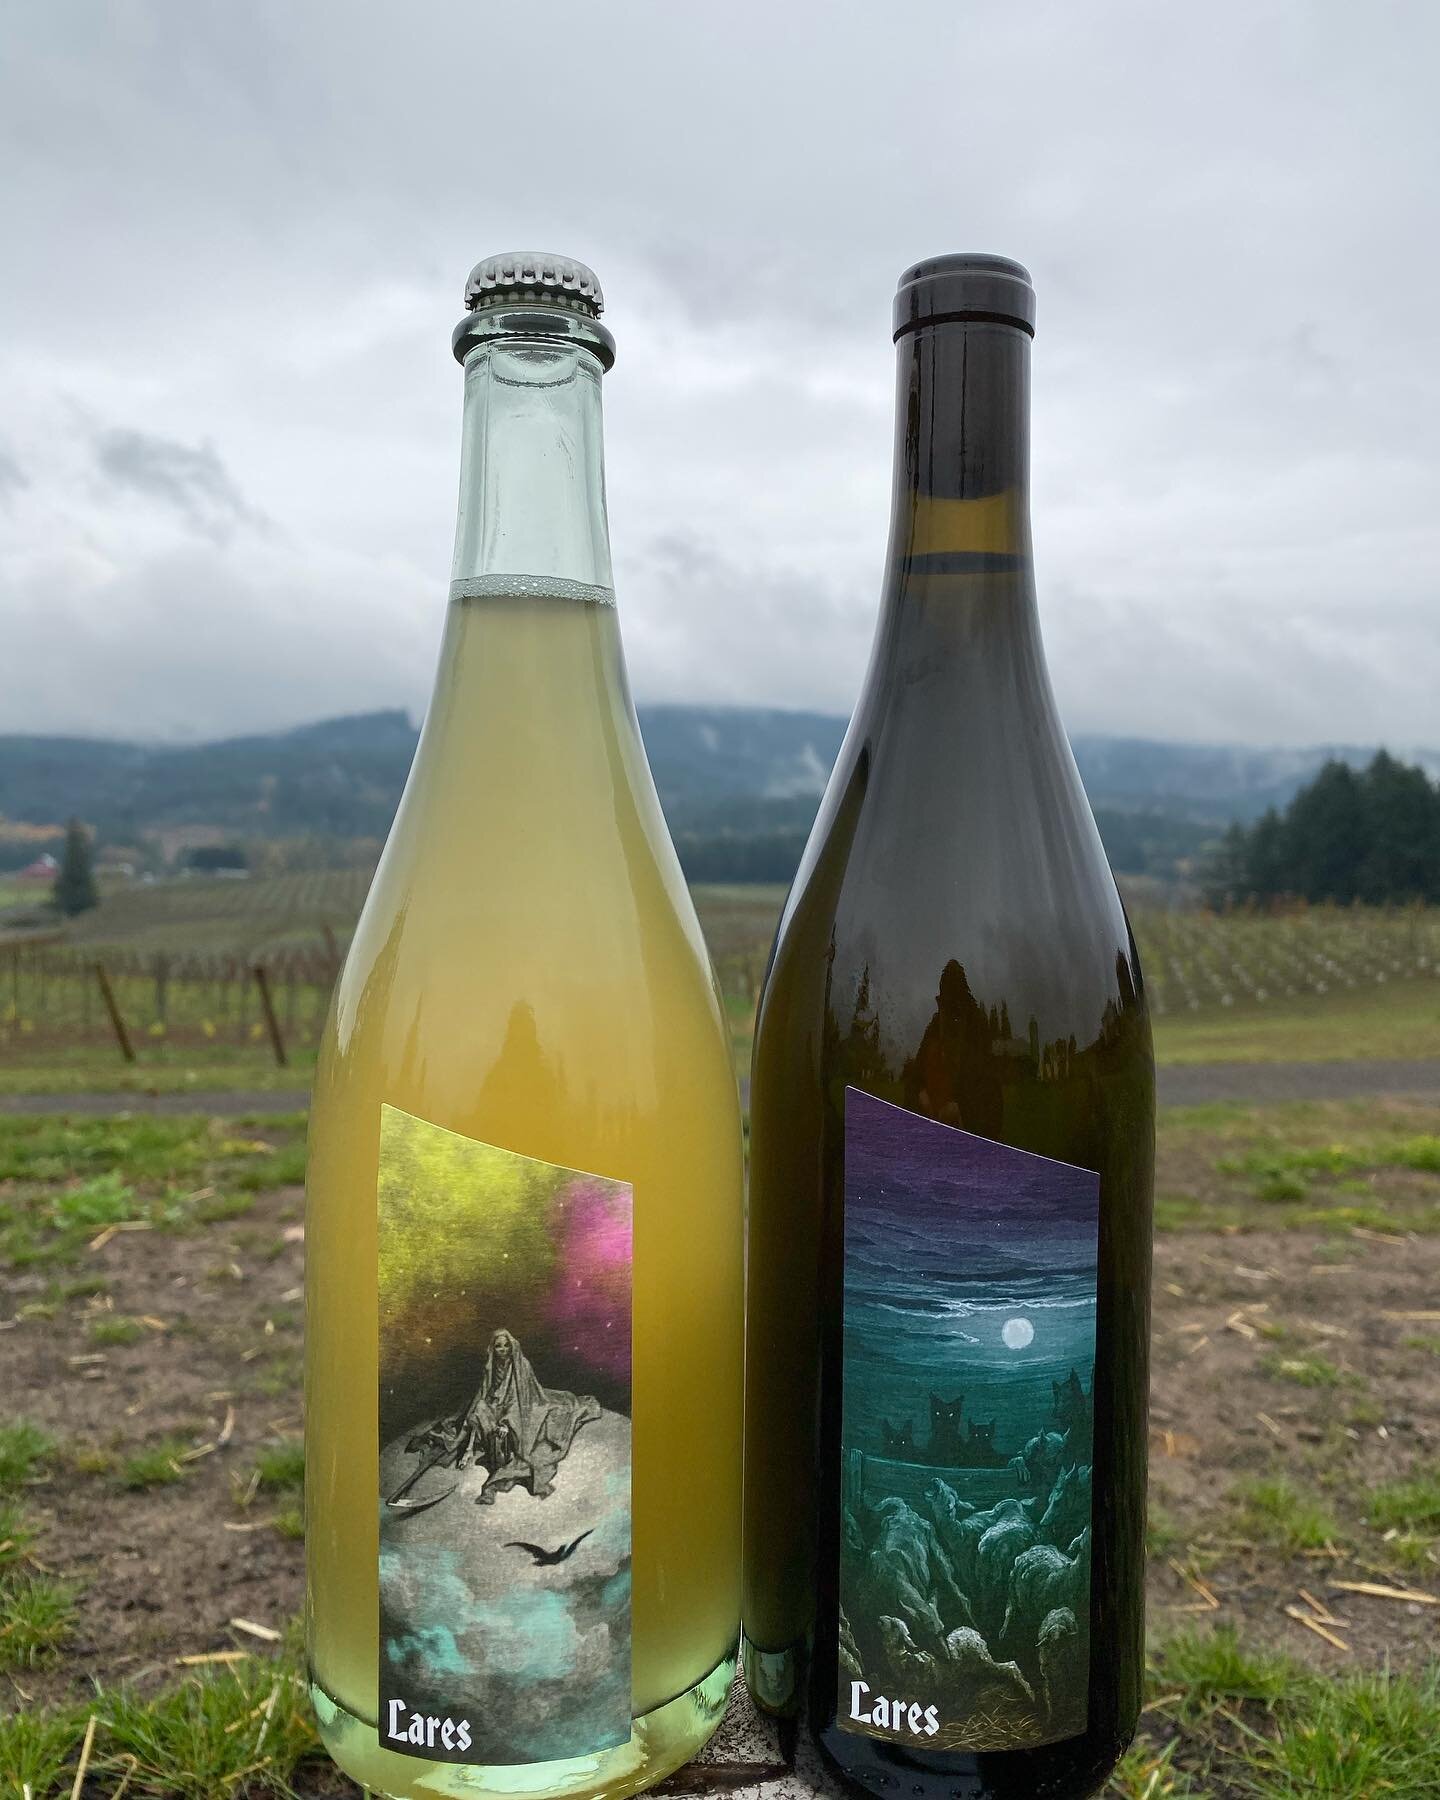 Limited quantities of my 2018 Aligot&eacute; and 2018 Methode Ancestrale Riesling are out together now. They were born in a time of darkness and thrive in the light of a new perspective.